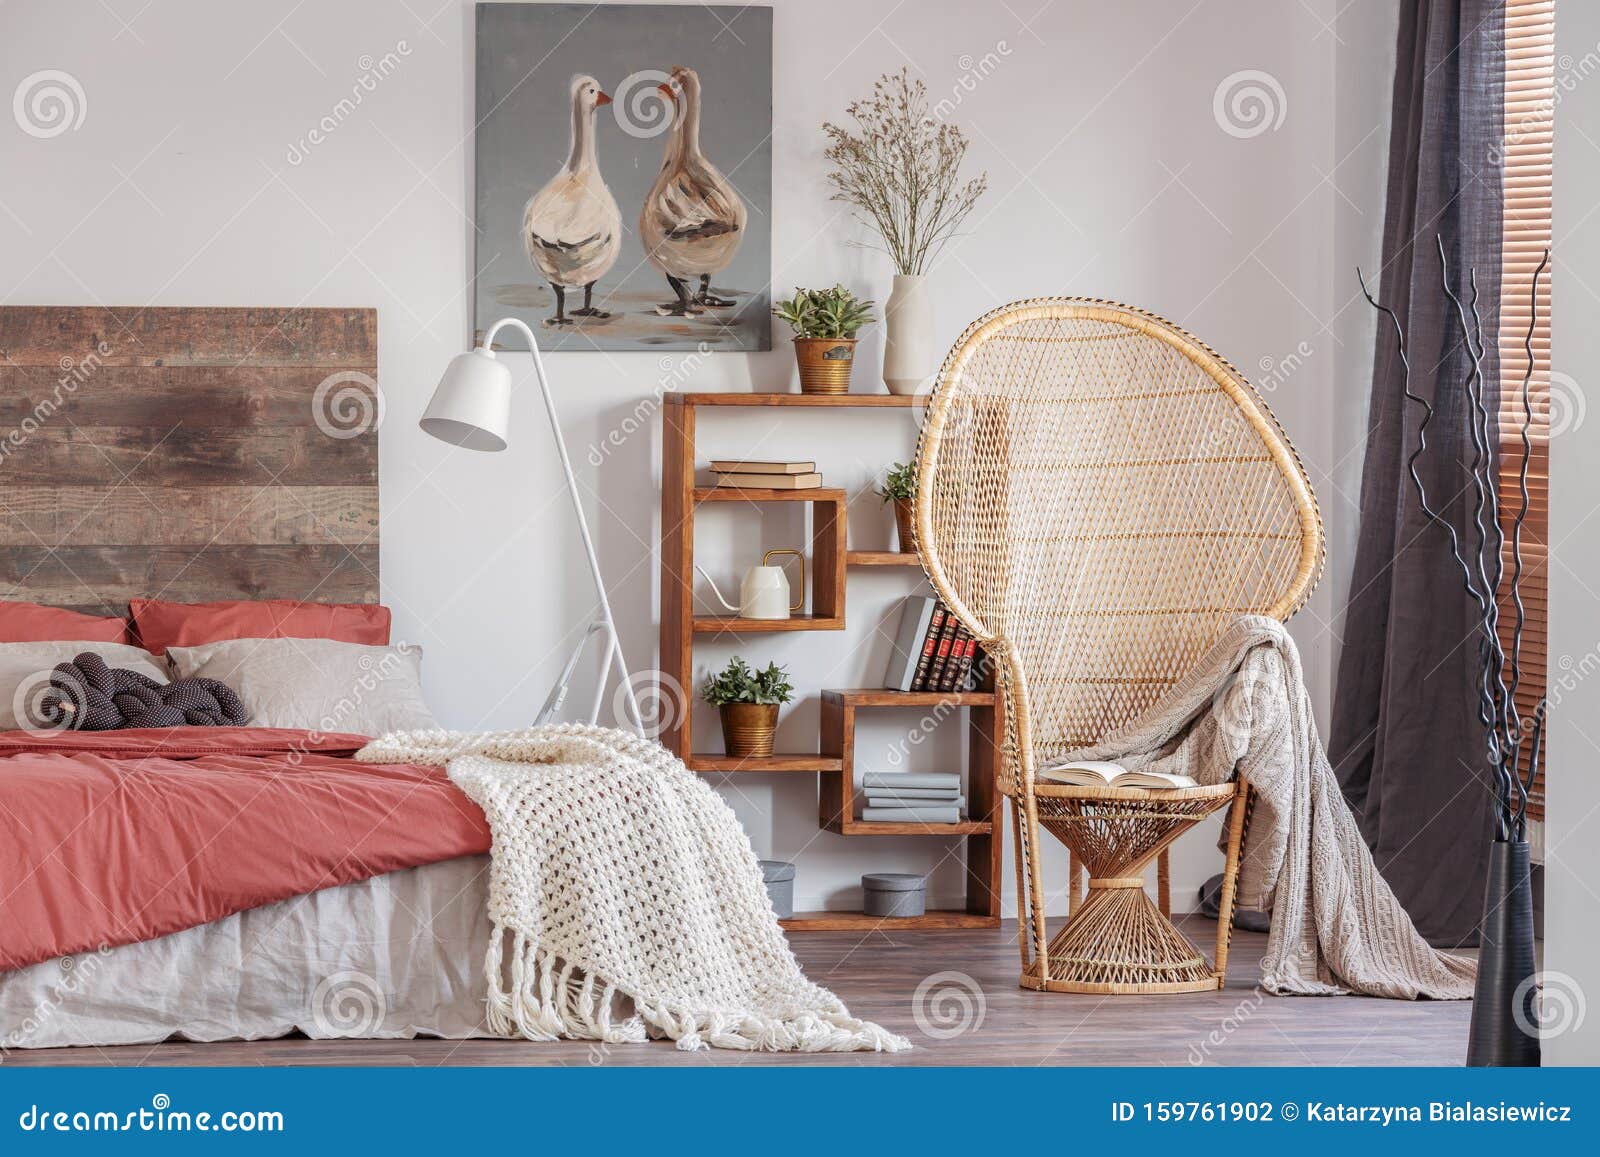 Wicker Peacock Chair With Blanket In Fashionable Rustic Bedroom